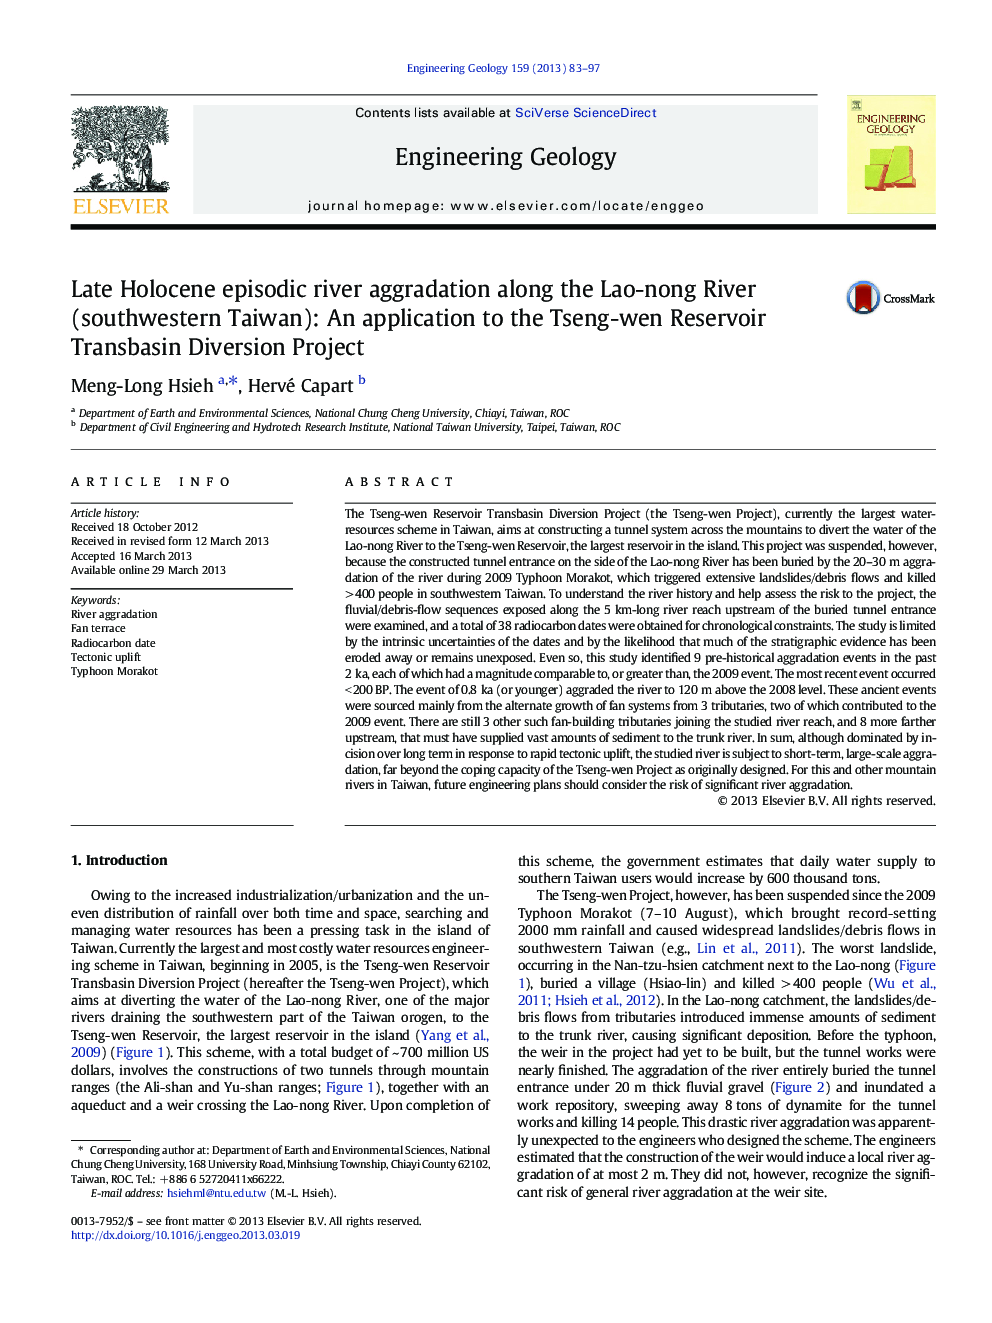 Late Holocene episodic river aggradation along the Lao-nong River (southwestern Taiwan): An application to the Tseng-wen Reservoir Transbasin Diversion Project